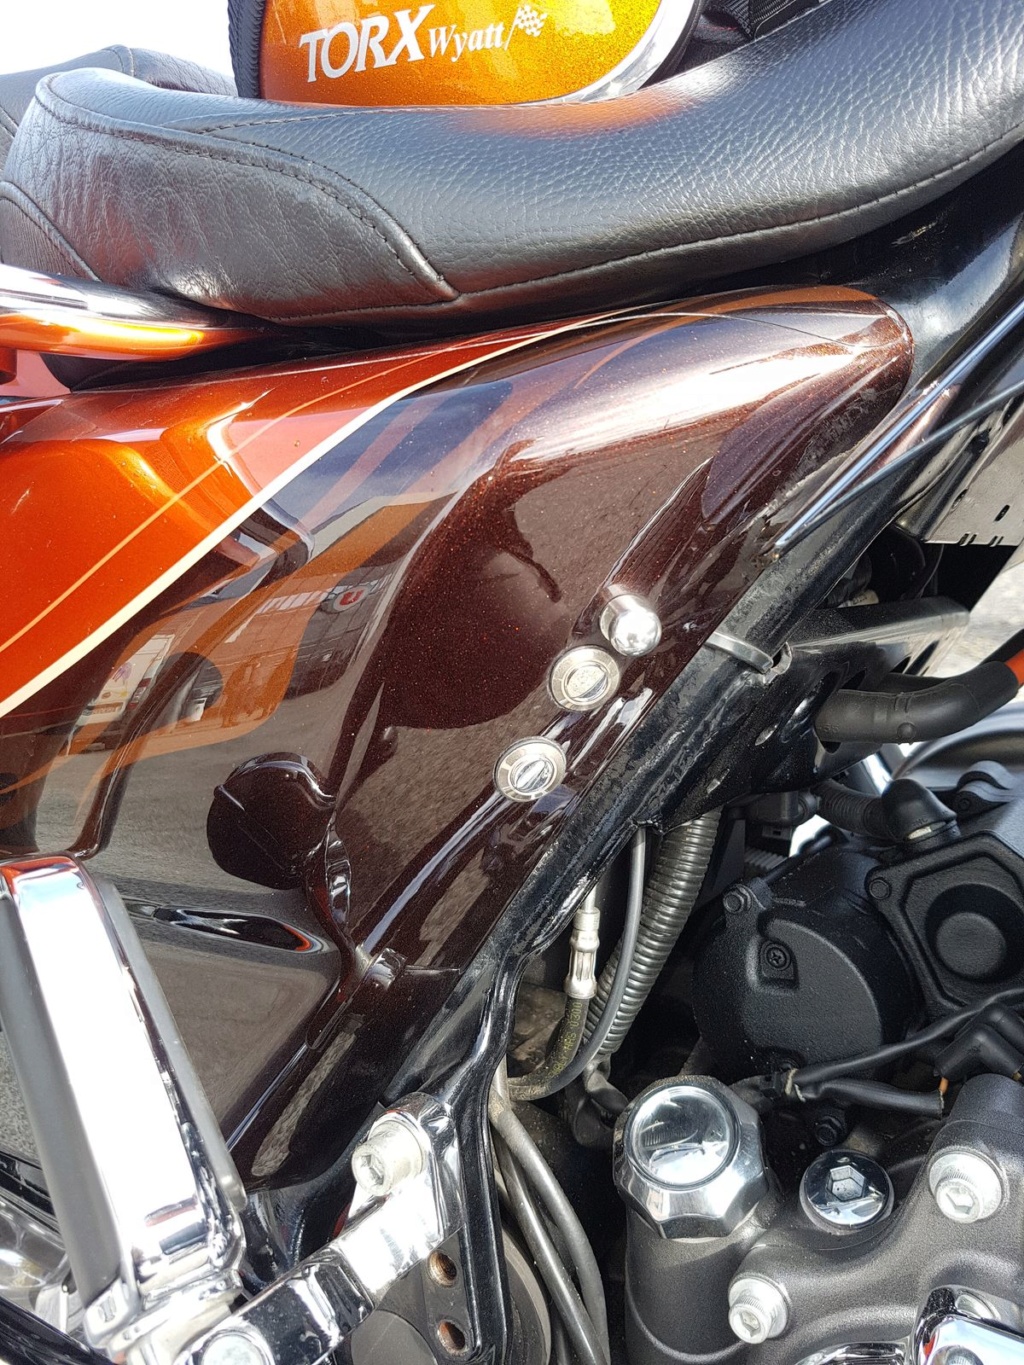 Street Glide CVO combien sommes nous sur Passion-Harley - Page 6 20190210